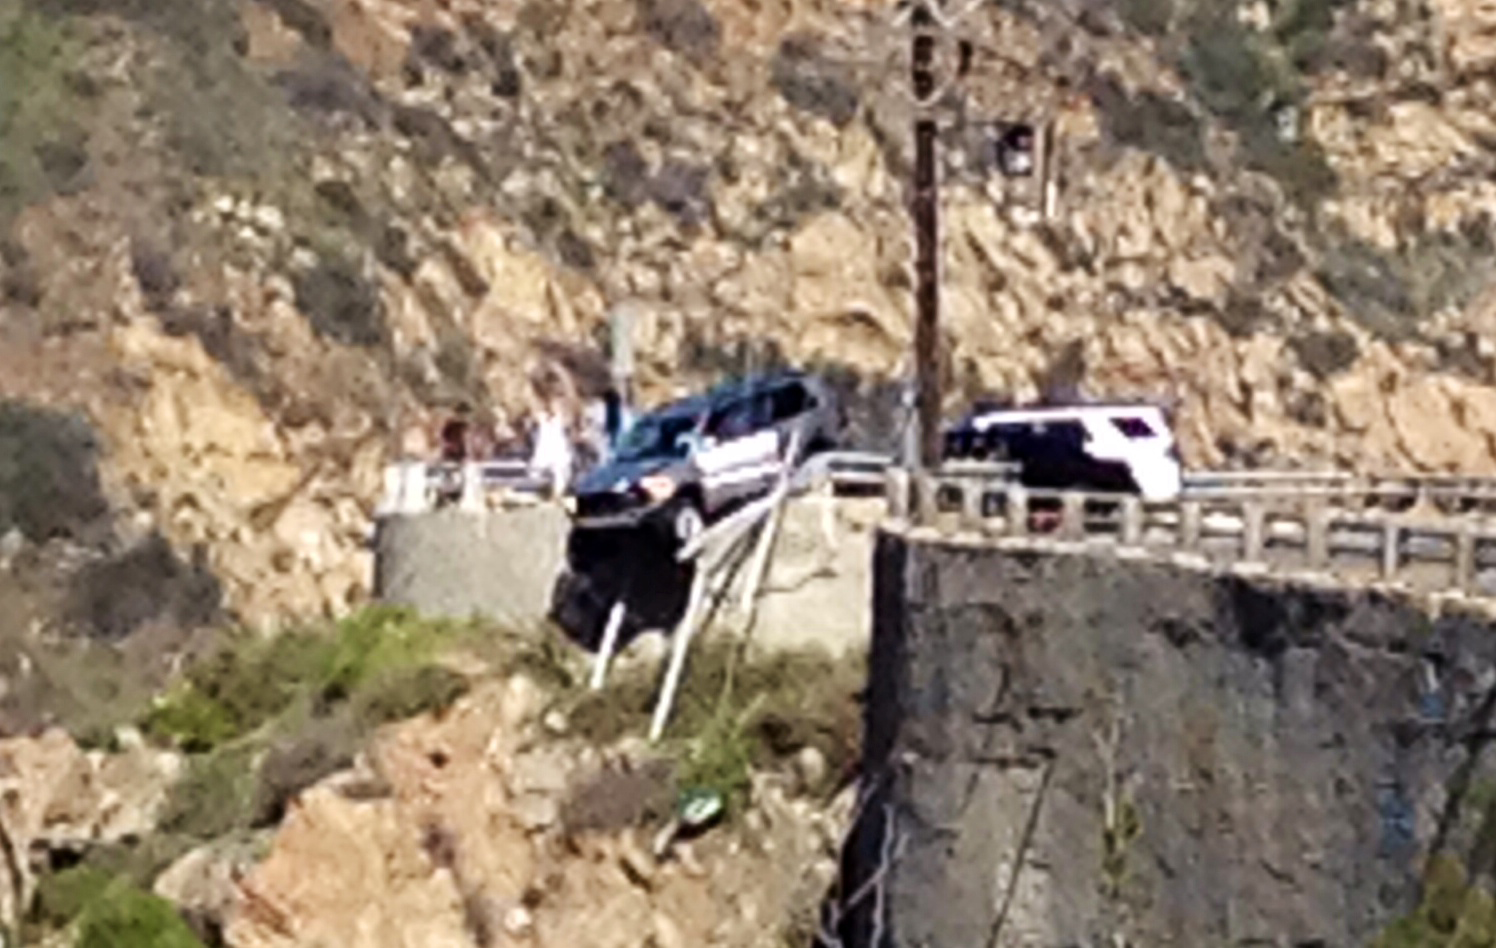 PHOTO: Images captured by ABC7 viewer Priscilla Kromnick show an SUV nearly falling over a ledge in Malibu on Saturday, April 2, 2016.